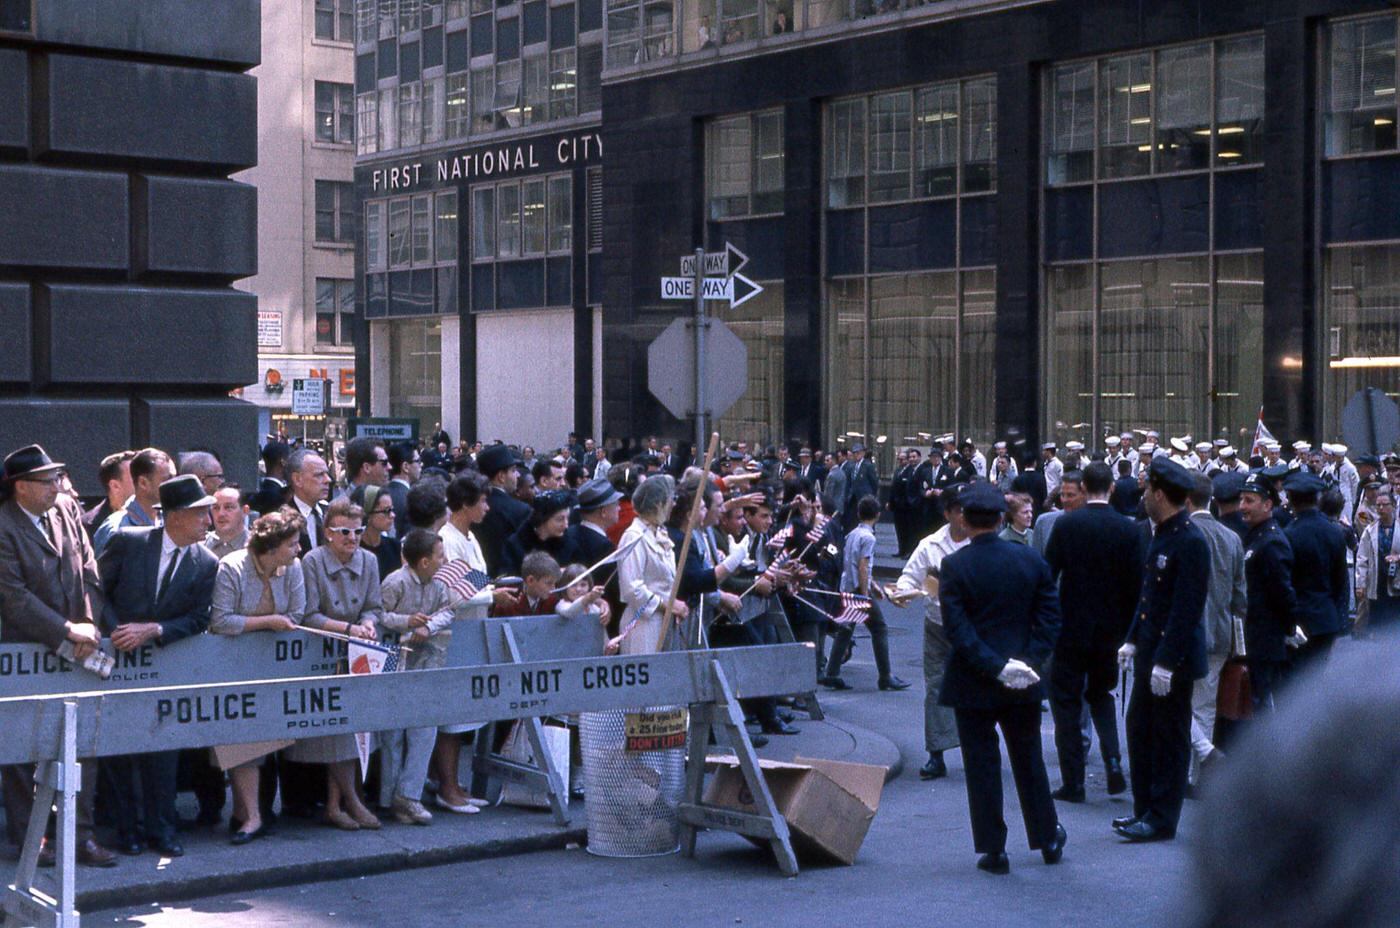 Nypd Police Officers Patrol Crowds During Gordon Cooper'S Ticker Tape Parade, Manhattan, 1963